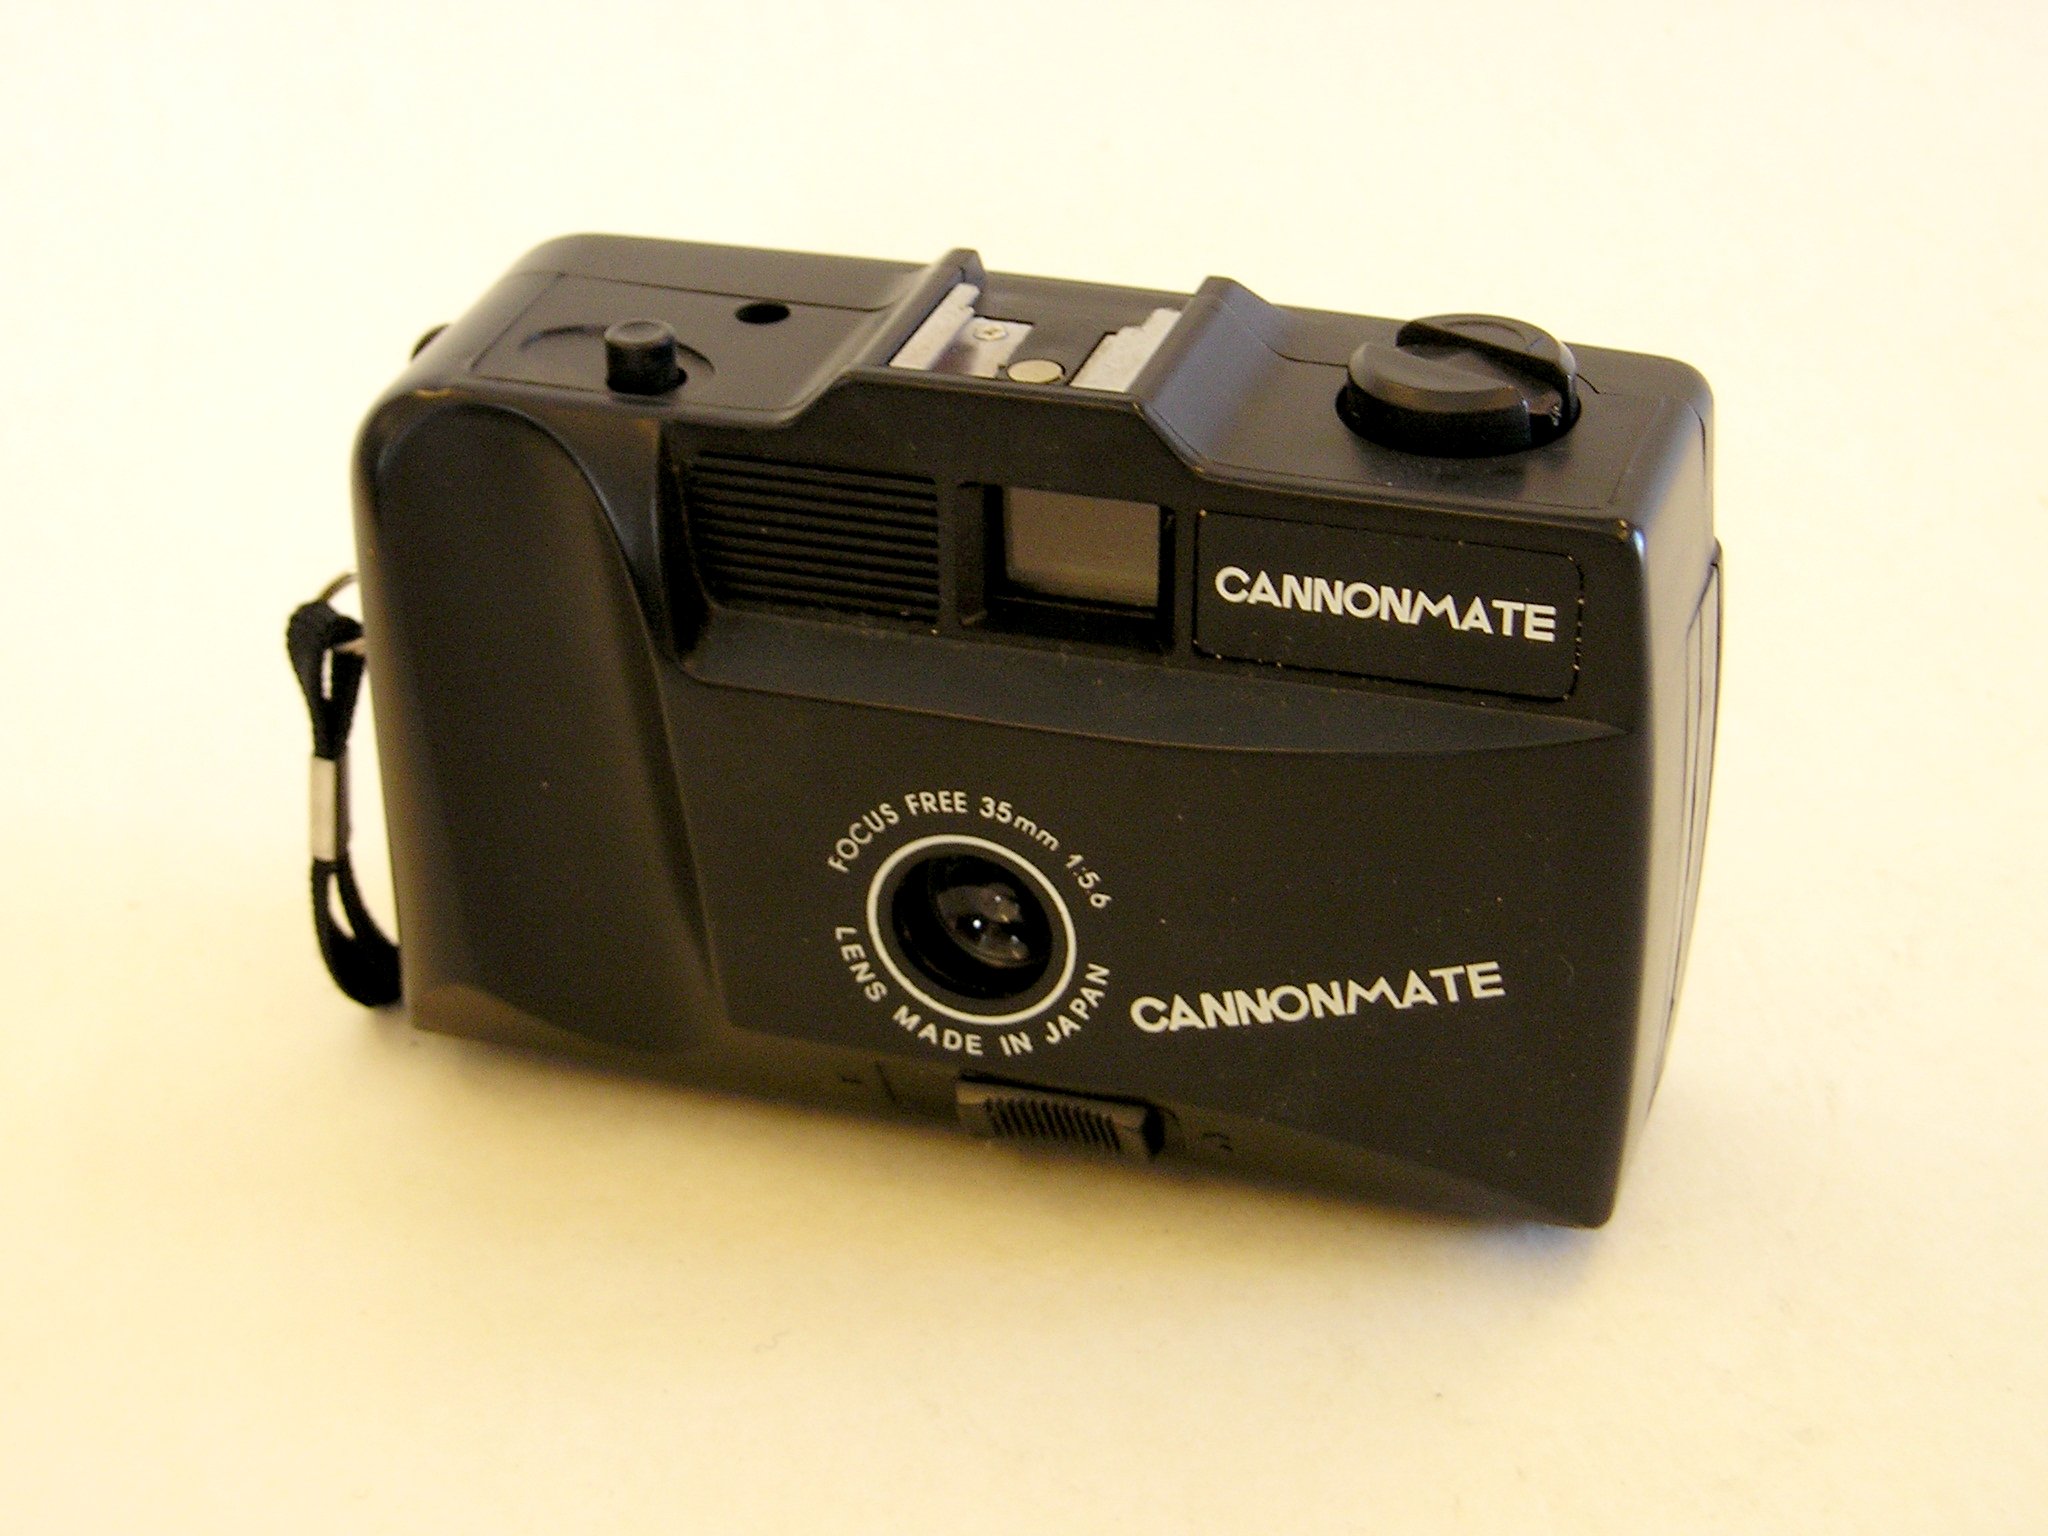 Cannonmate Canonmate